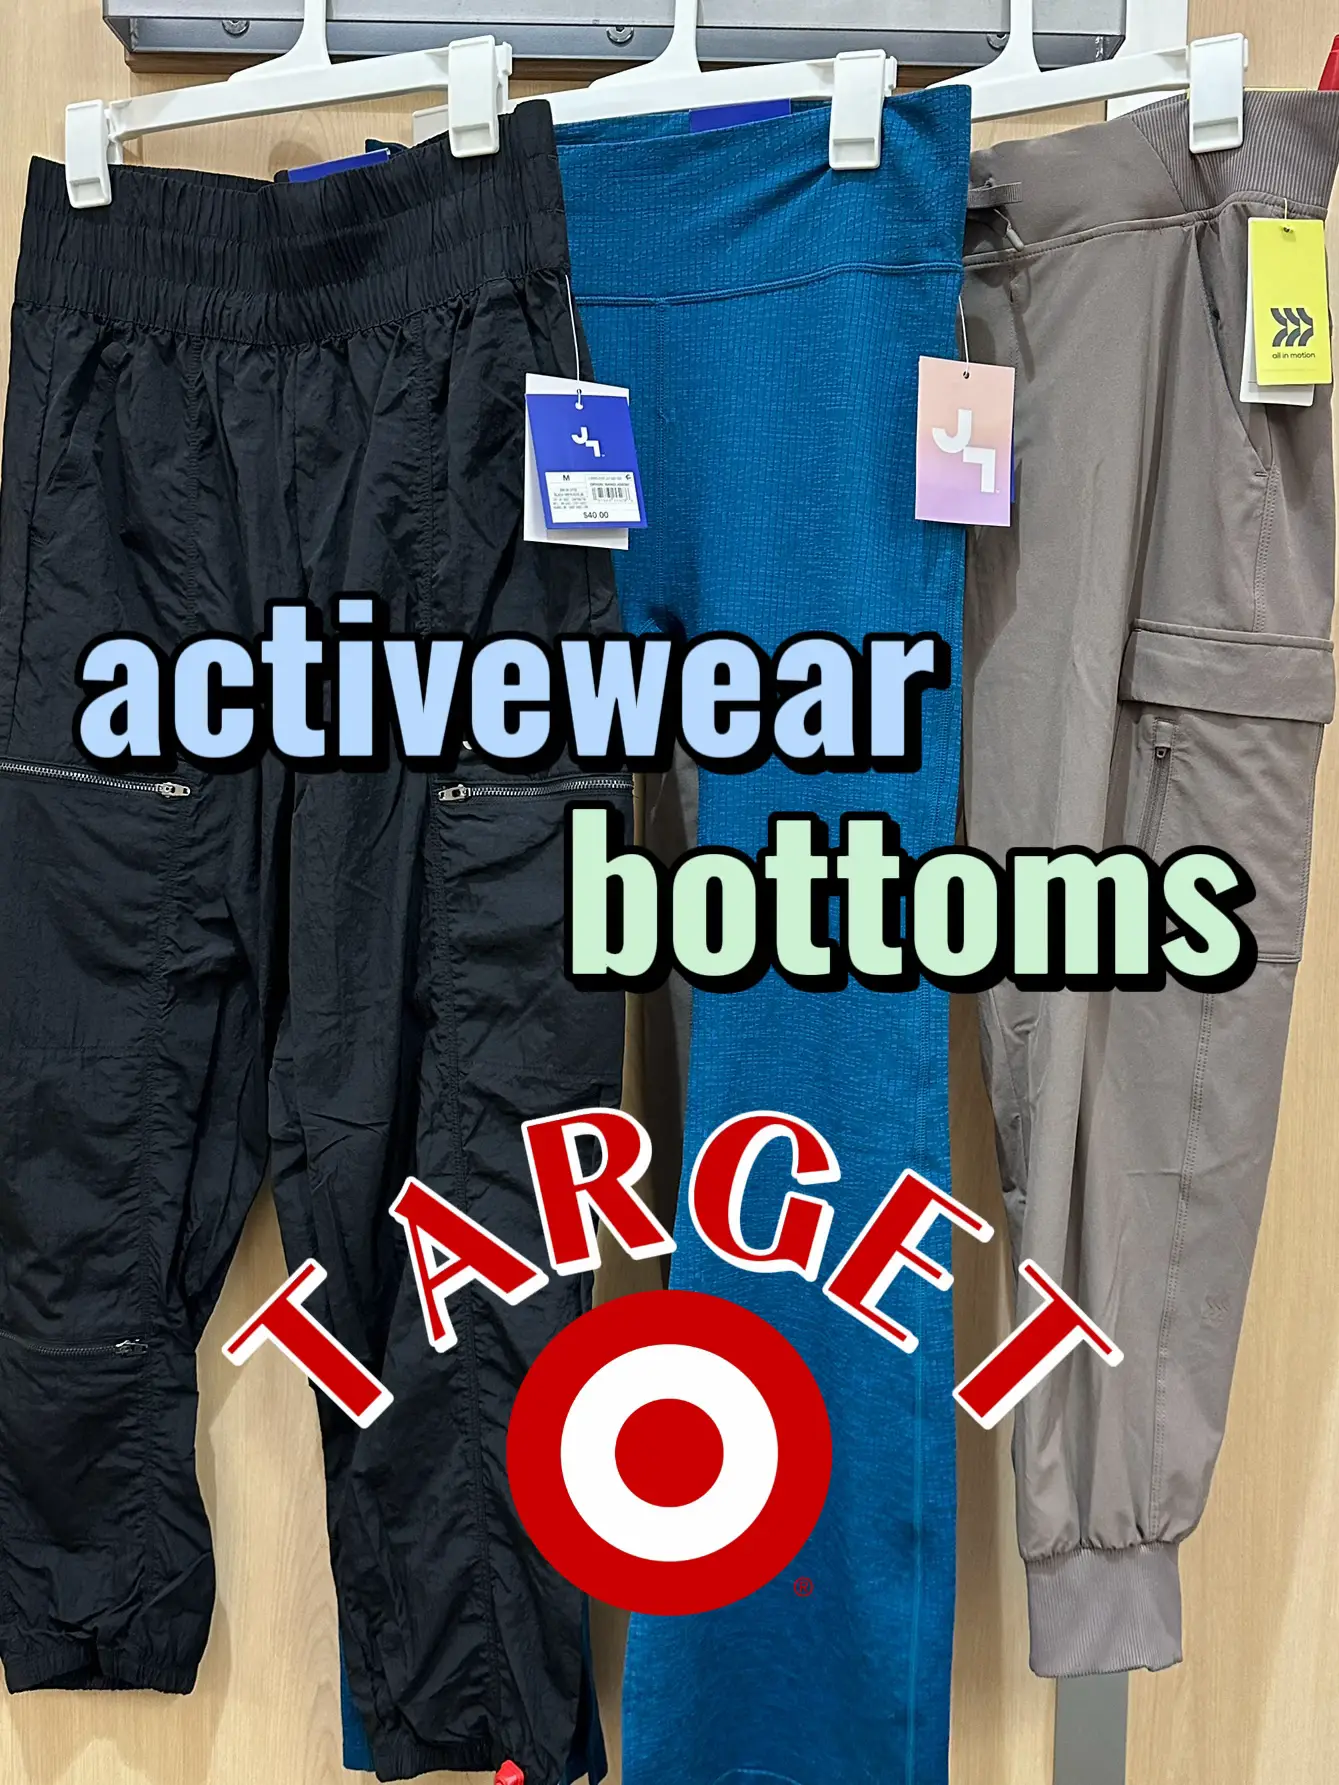  Two pairs of activewear bottoms are displayed on a rack.